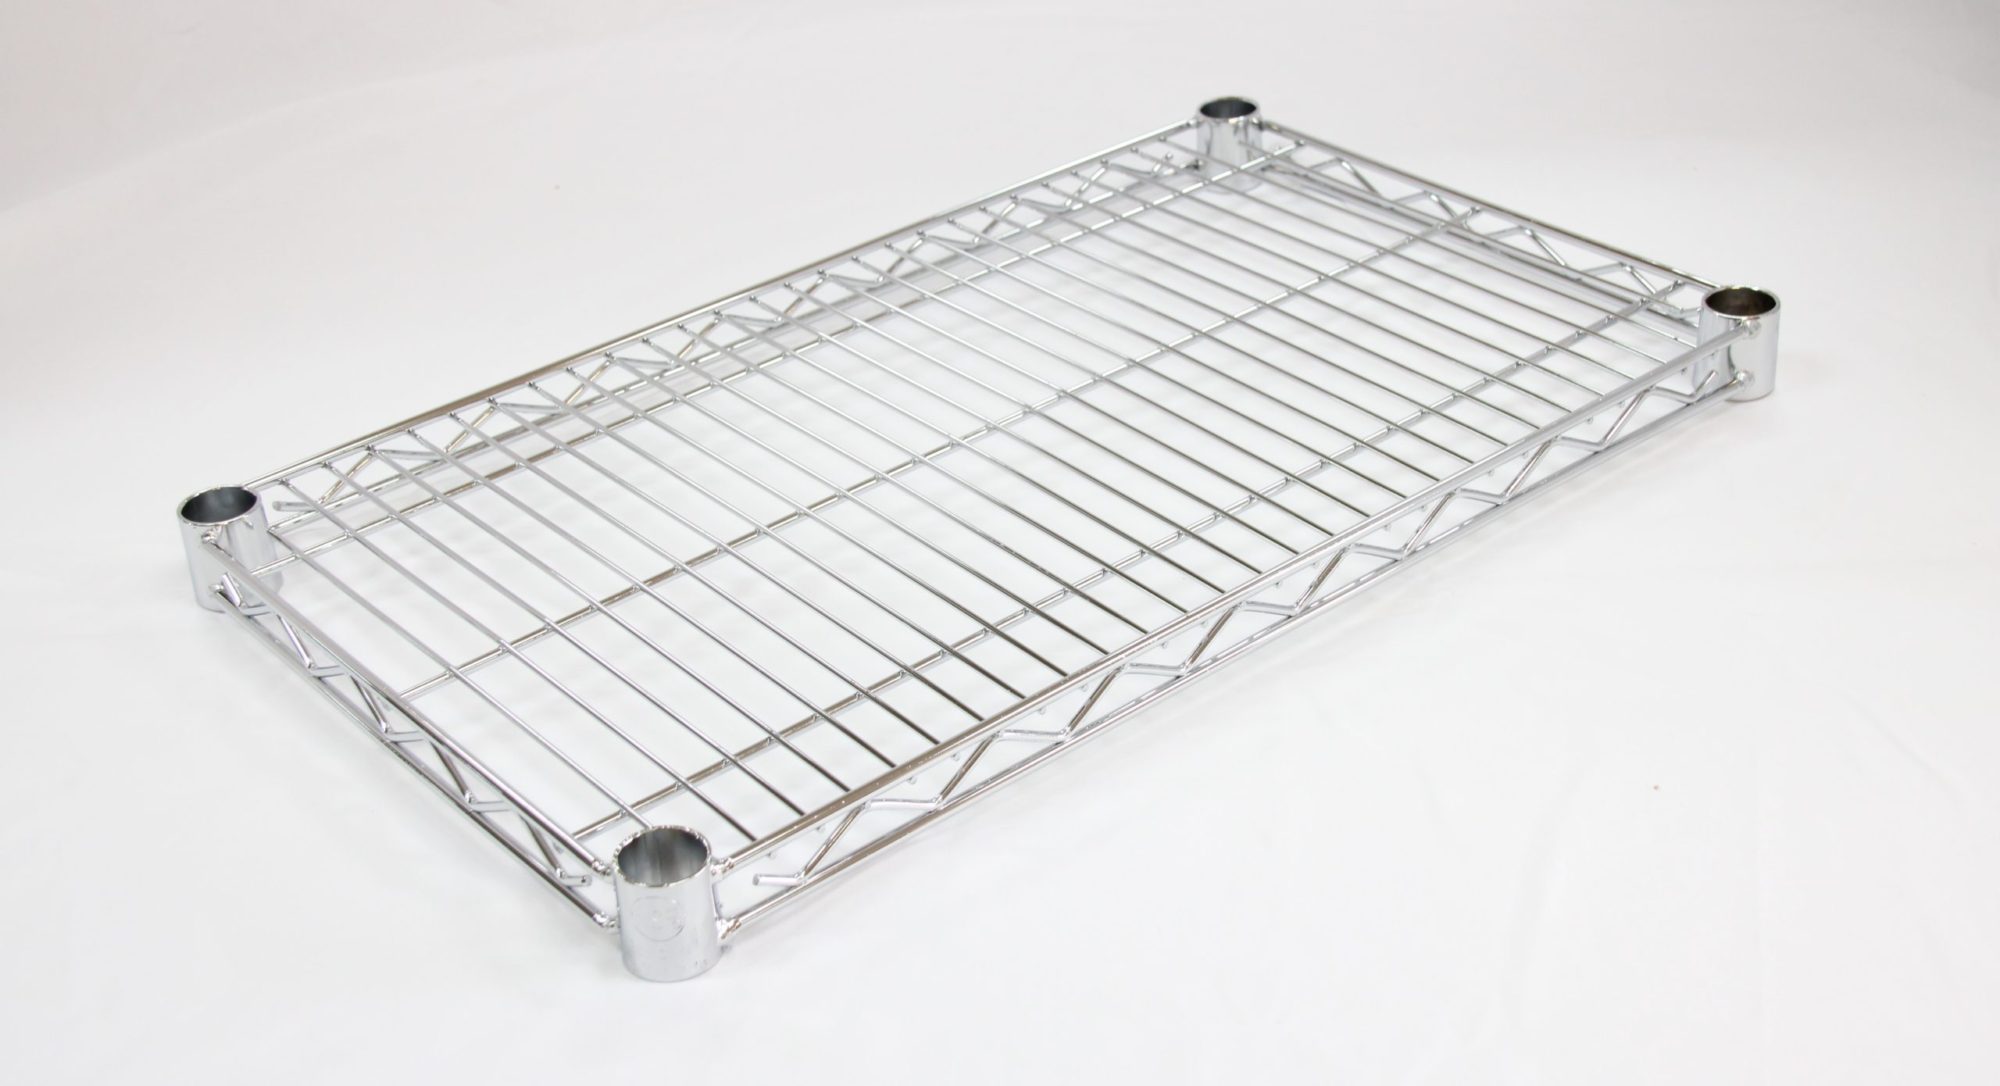 Omcan Wire Mesh Shelving 24" x 60" 20120 Chrome 2 Pack-S2460C